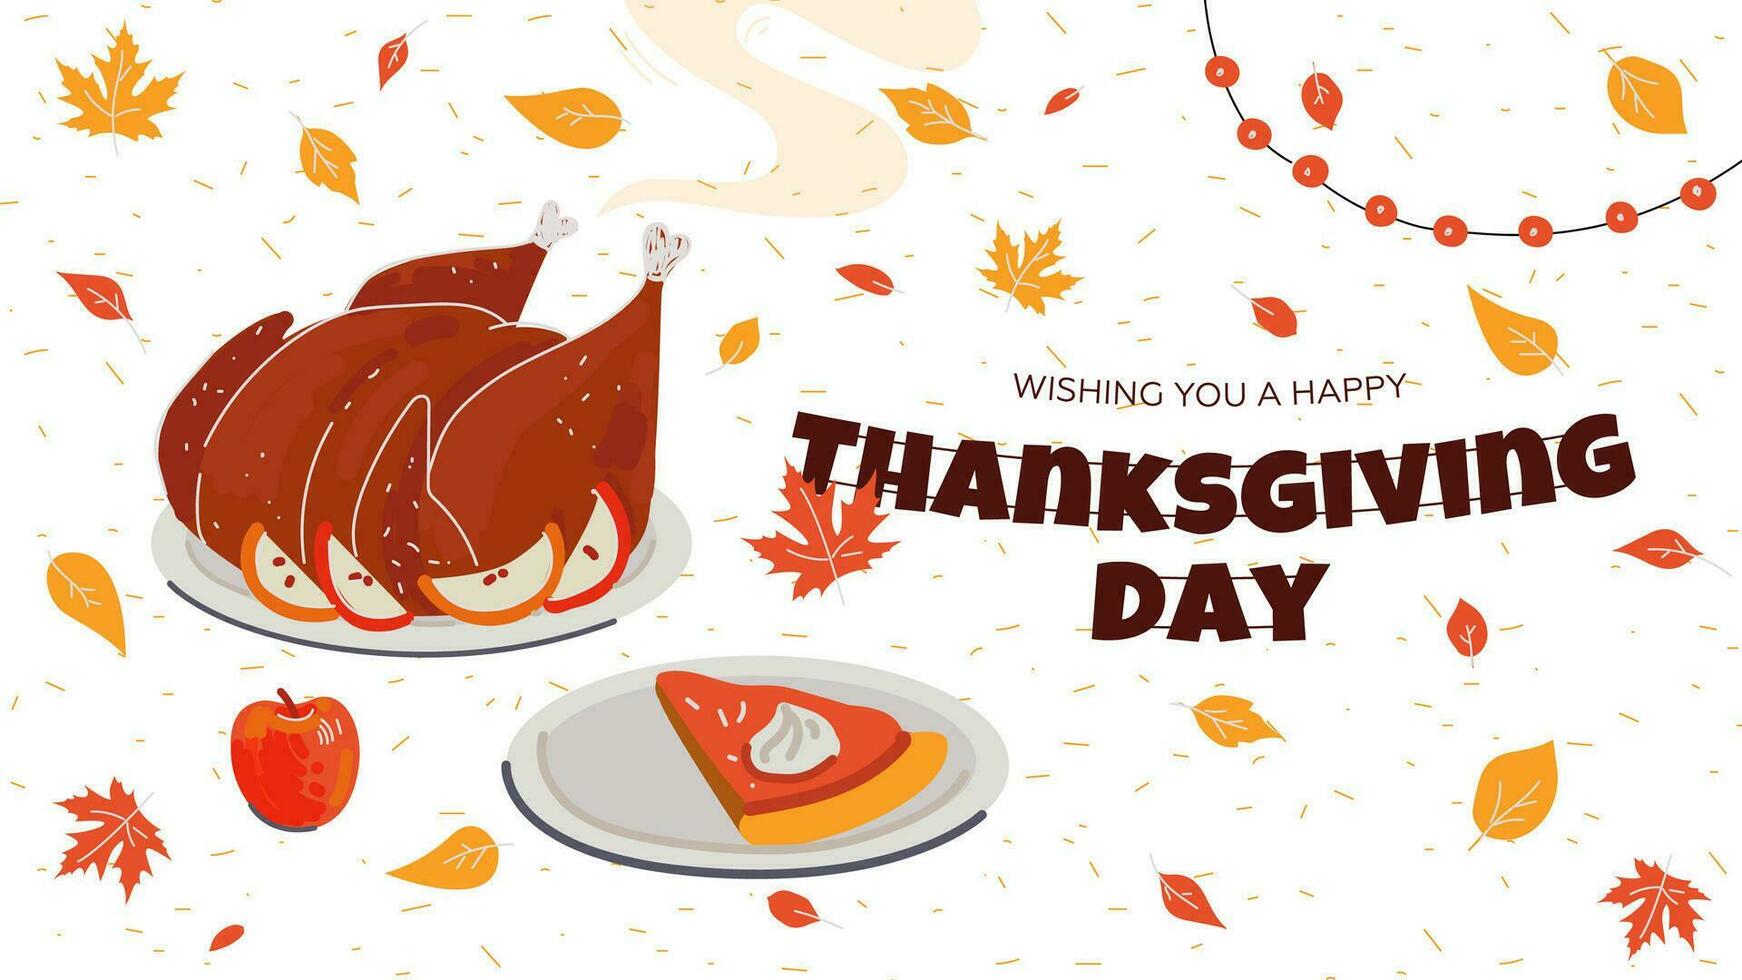 Happy Thanksgiving day horizontal banner. Traditional autumn Thanks Giving celebration greeting card with turkey and pumpkin pie. Seasonal fall family festival print. Retro drawing art vector design